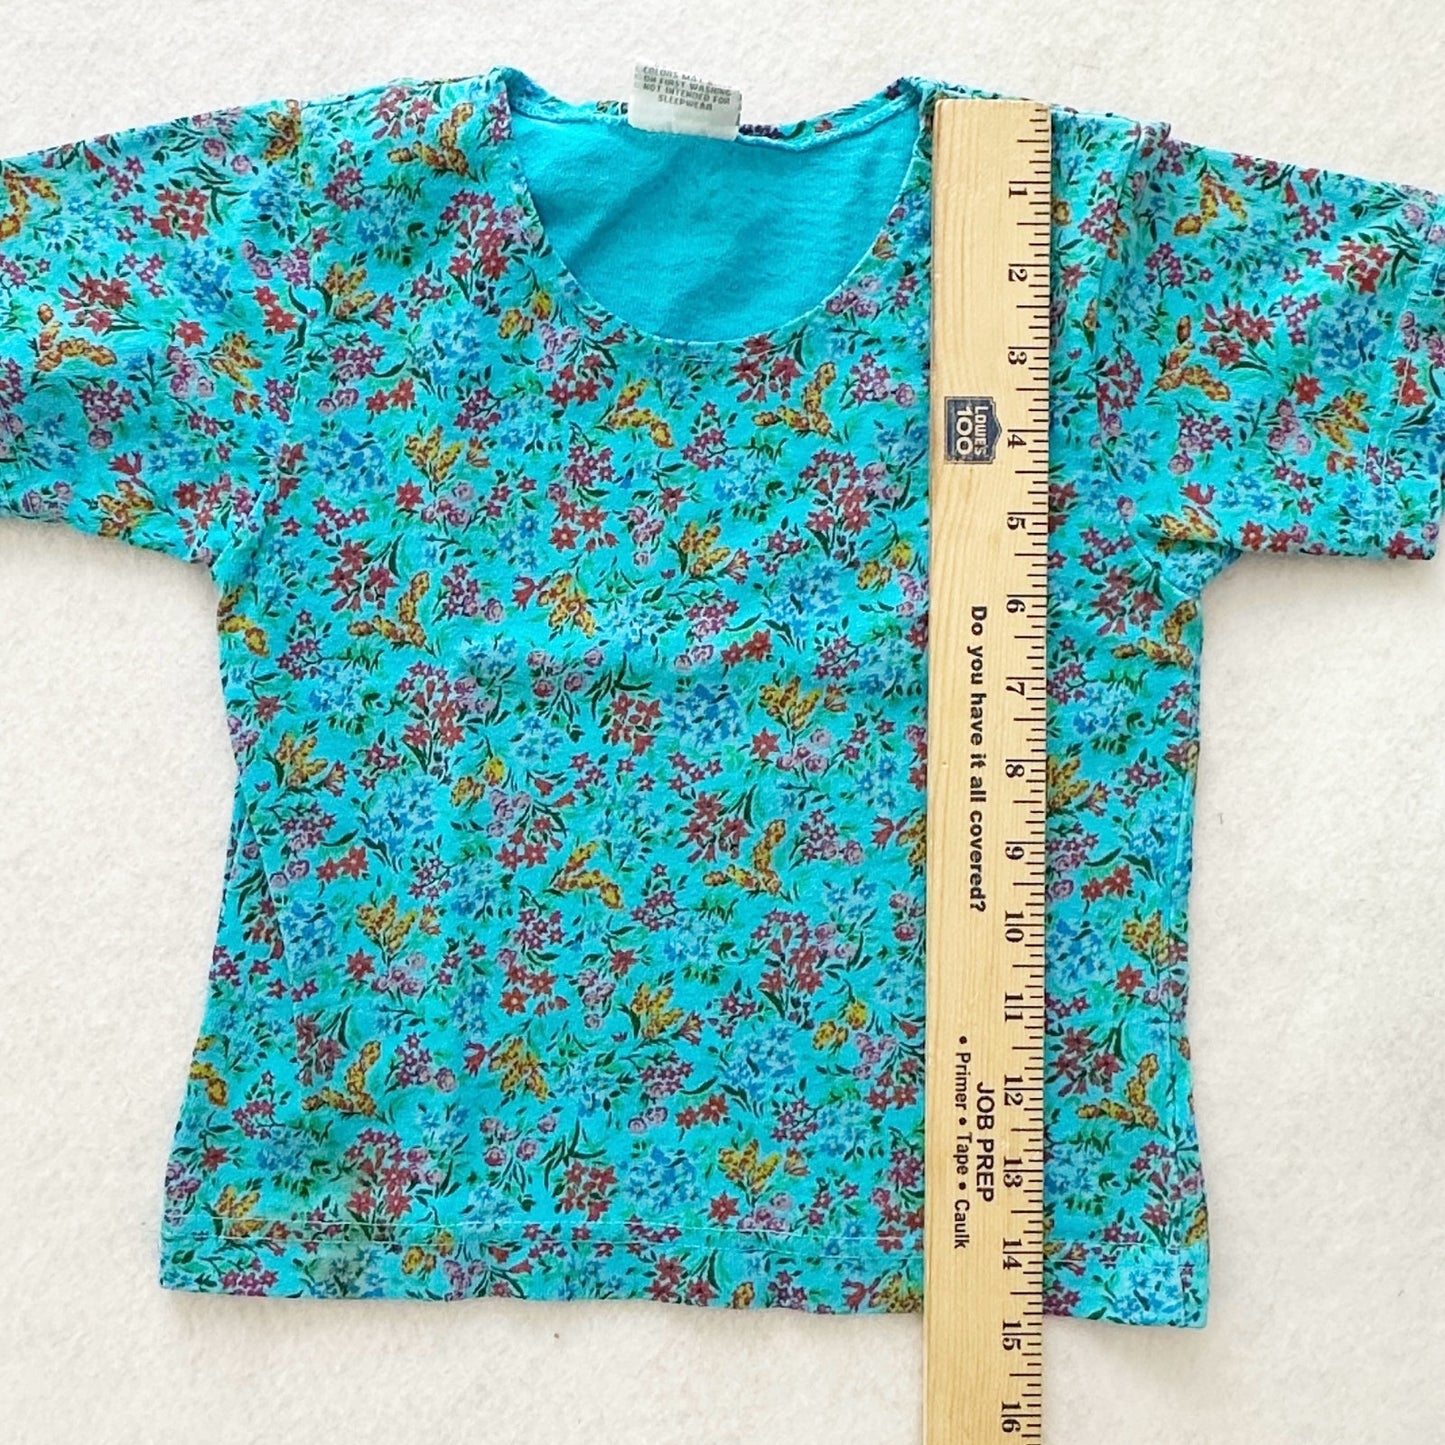 Vintage G. Willikers Floral Turquoise Tee: 4T